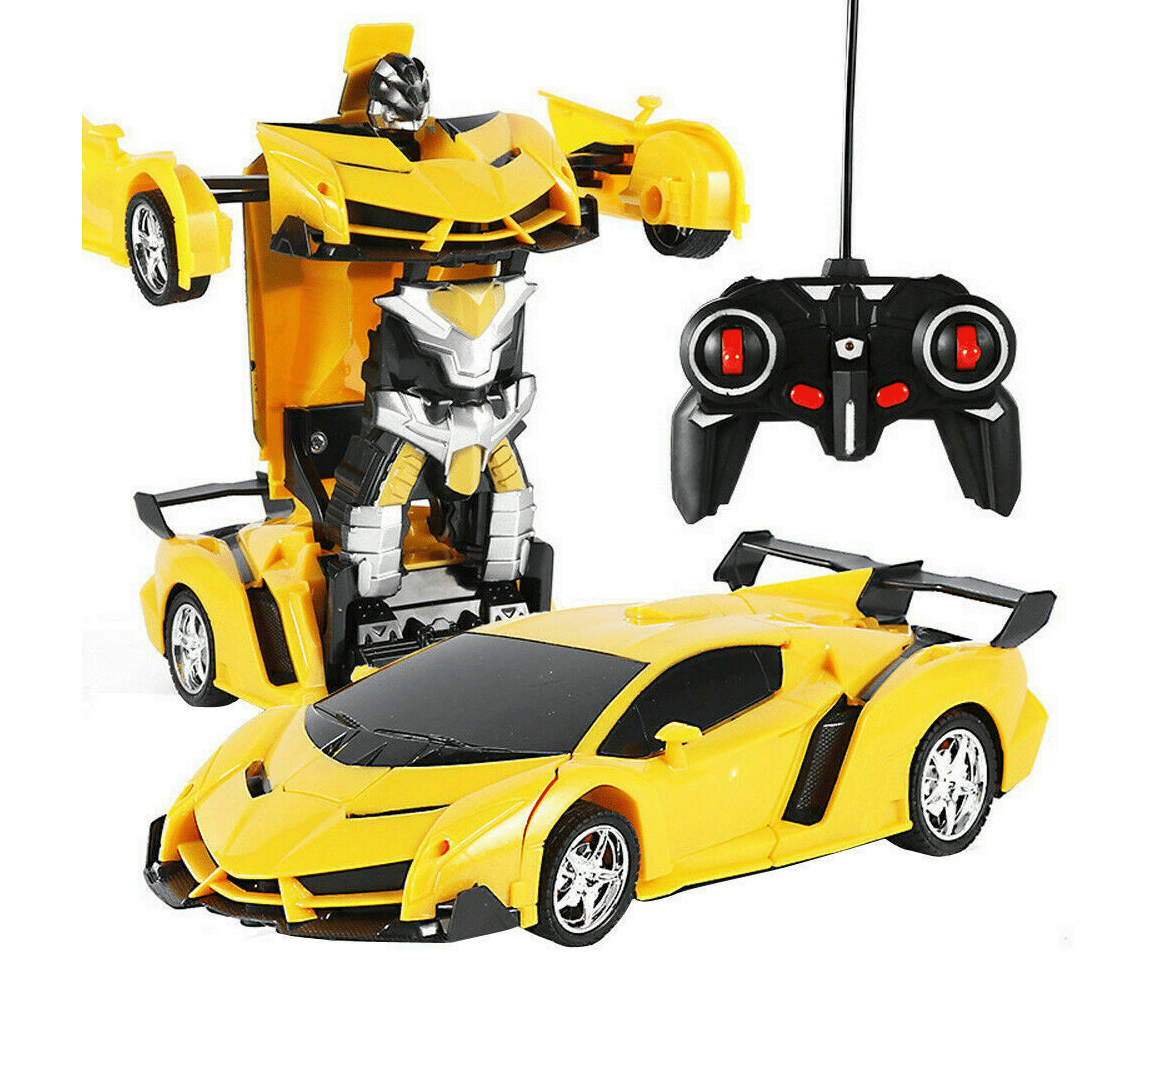 1:18 Transformer RC Robot Car Remote Control 2 IN 1 Kids Boys Toy B-Day Gift US 